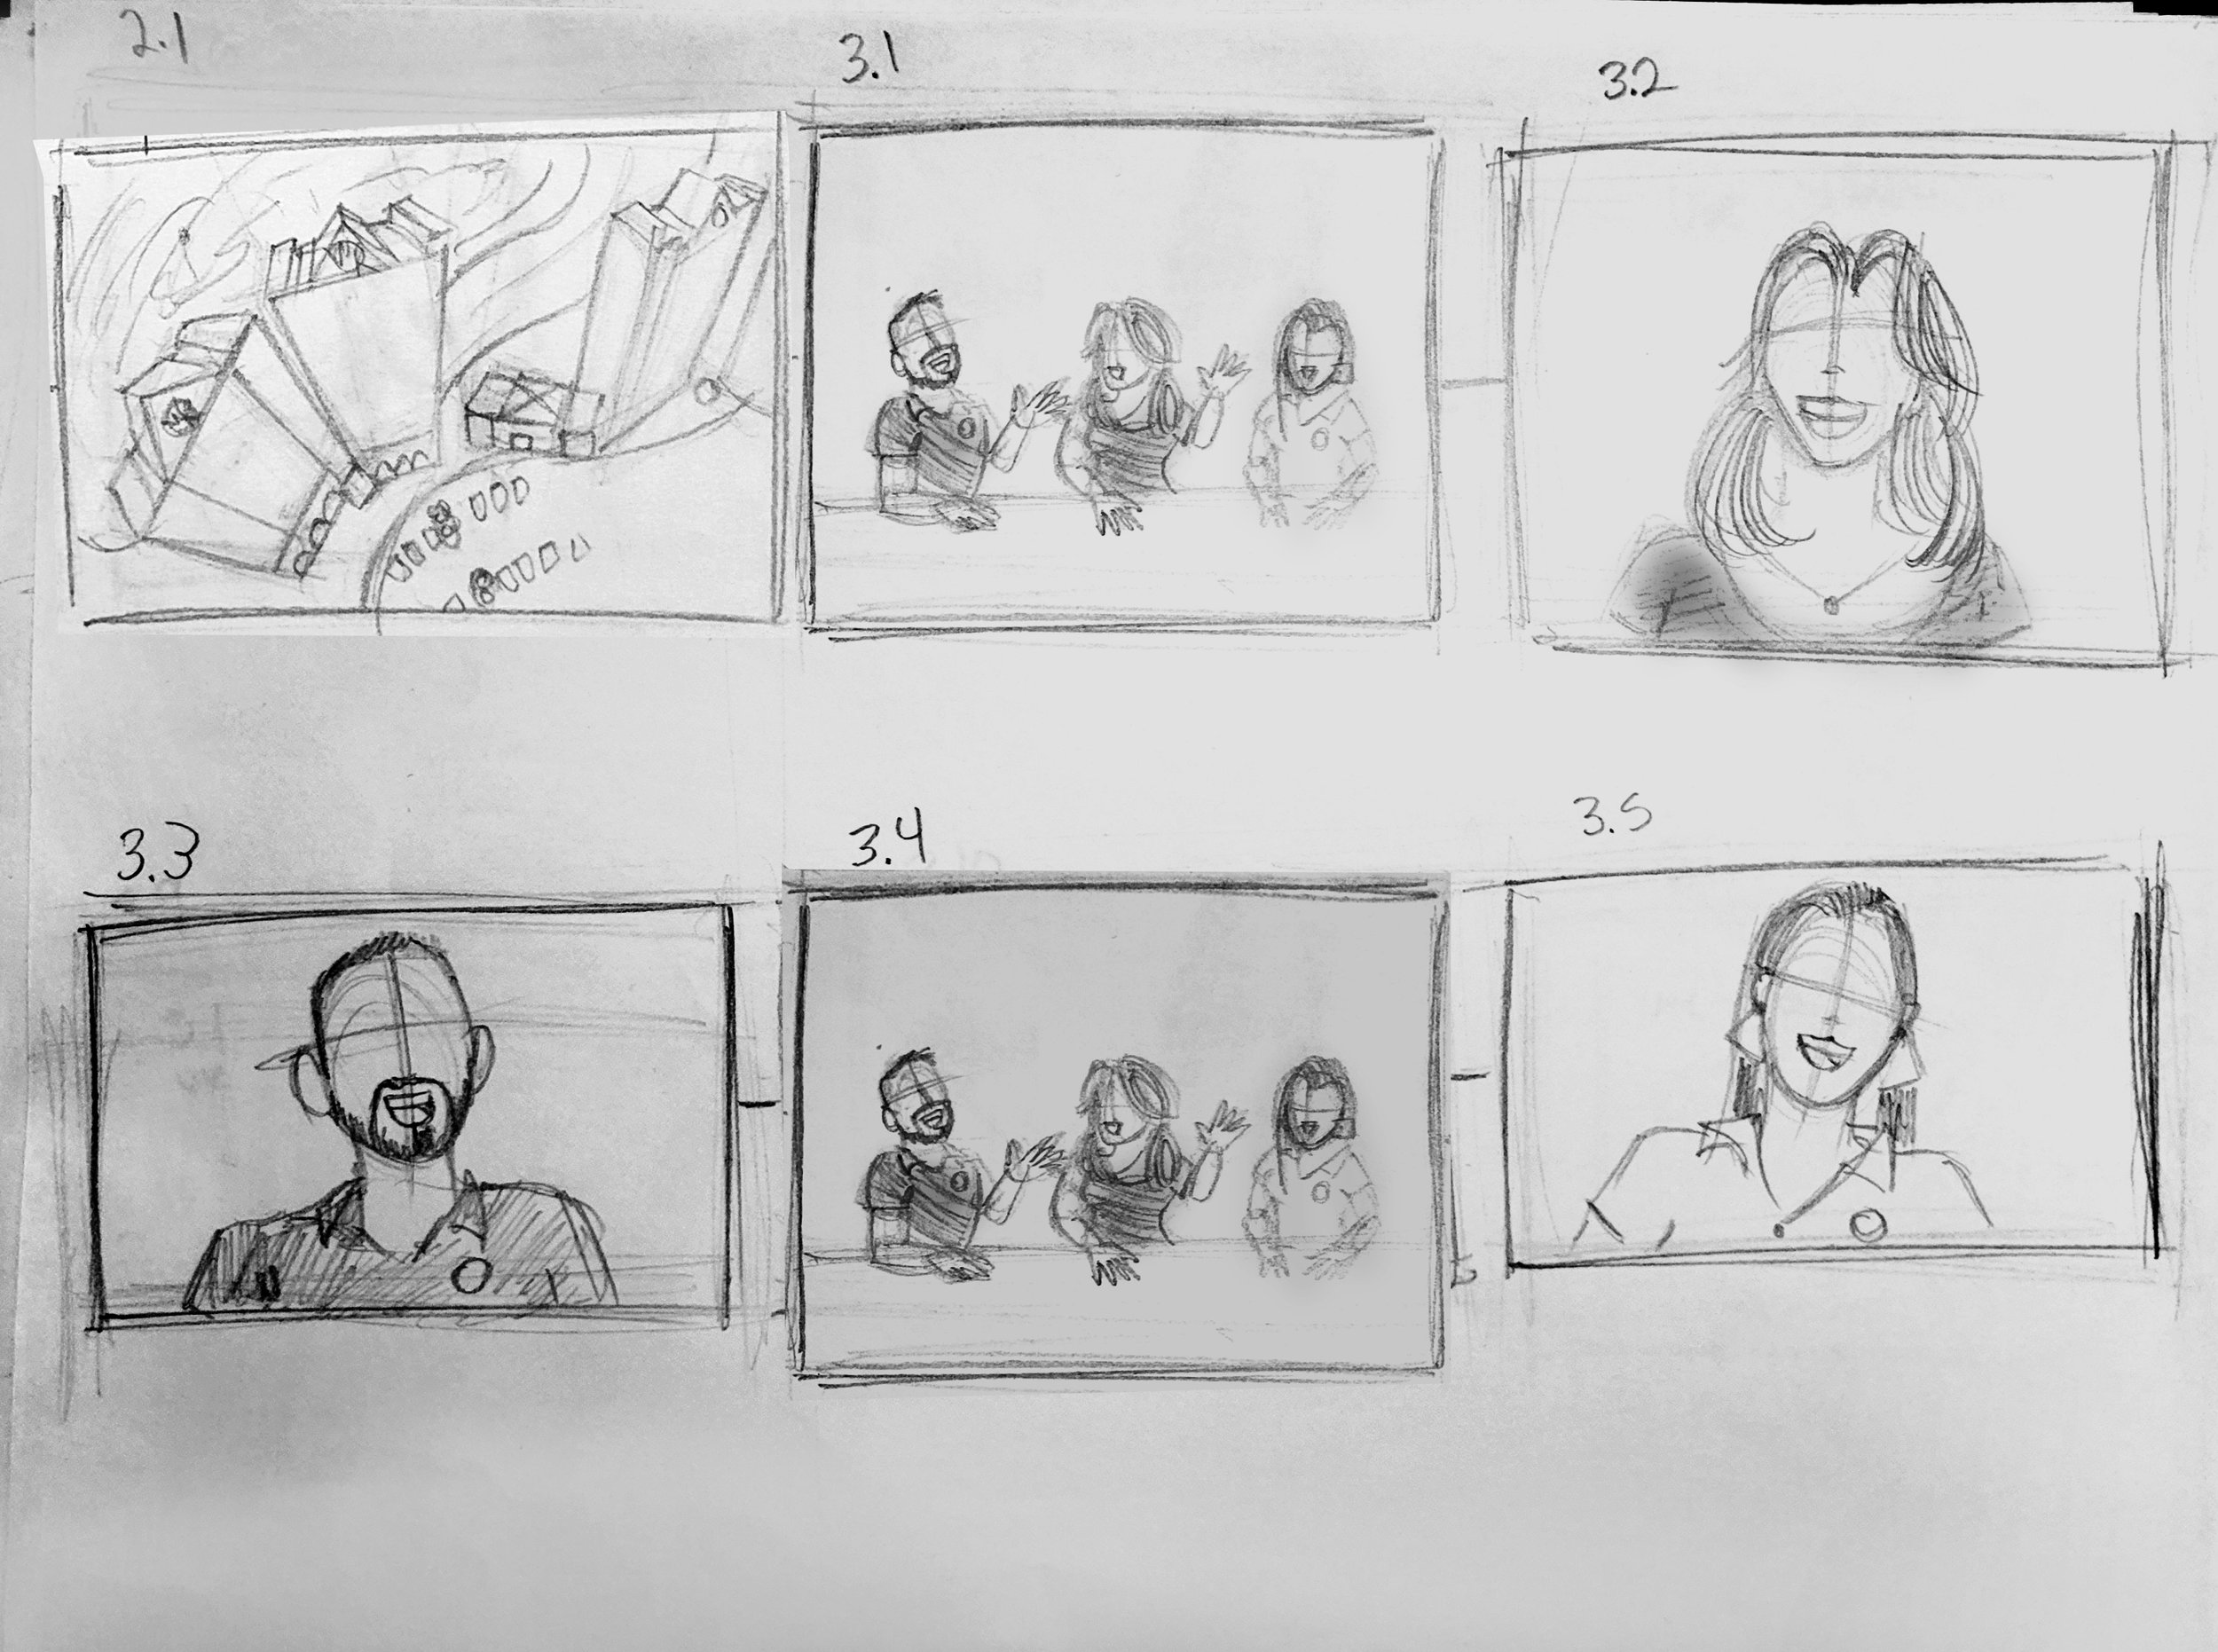 WR_Real_Suite_Eats_S1_E2_StoryBoard_Frames_2_1_to_3_5.jpg